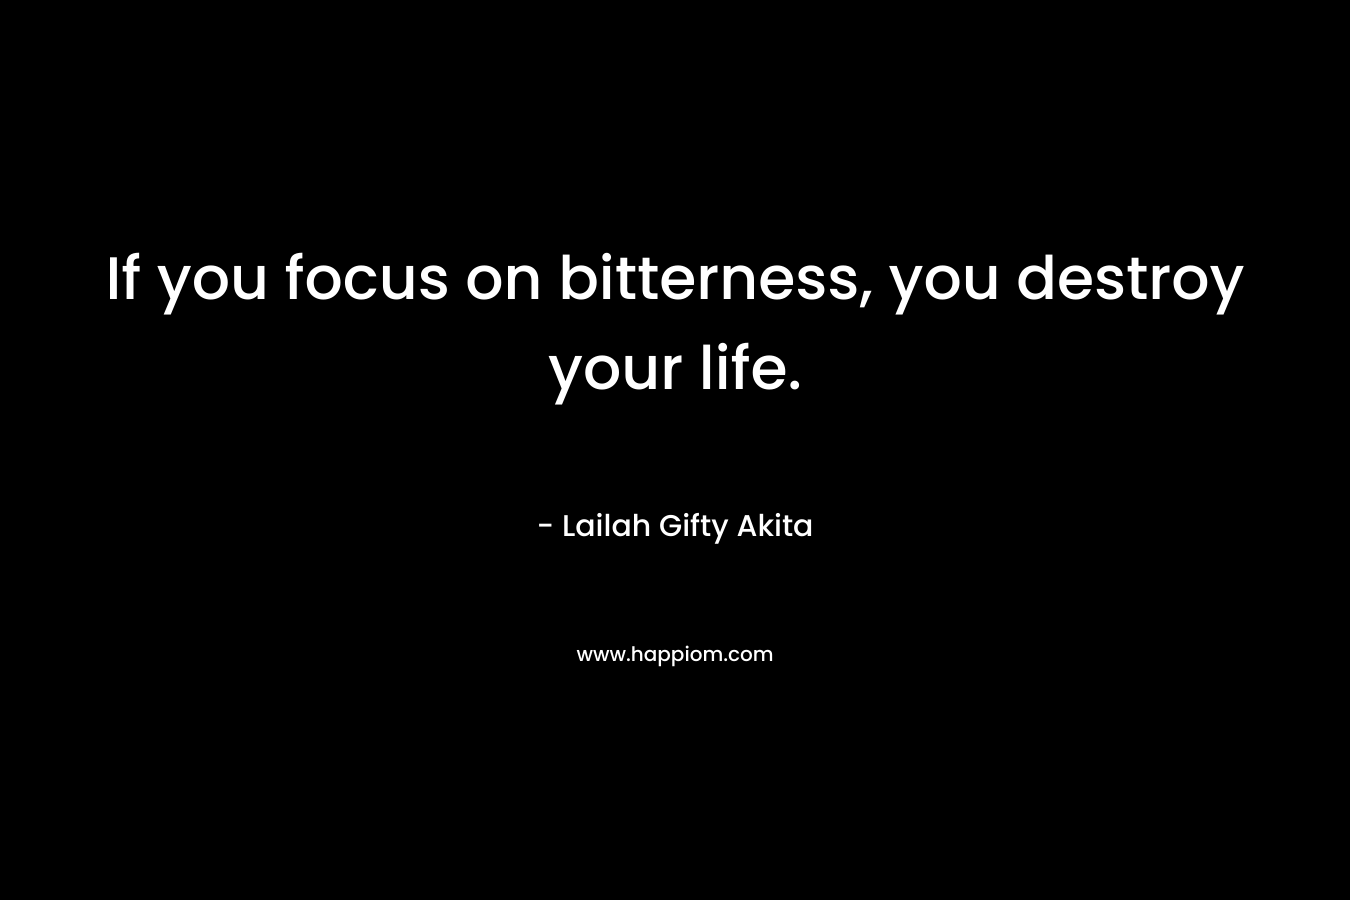 If you focus on bitterness, you destroy your life.